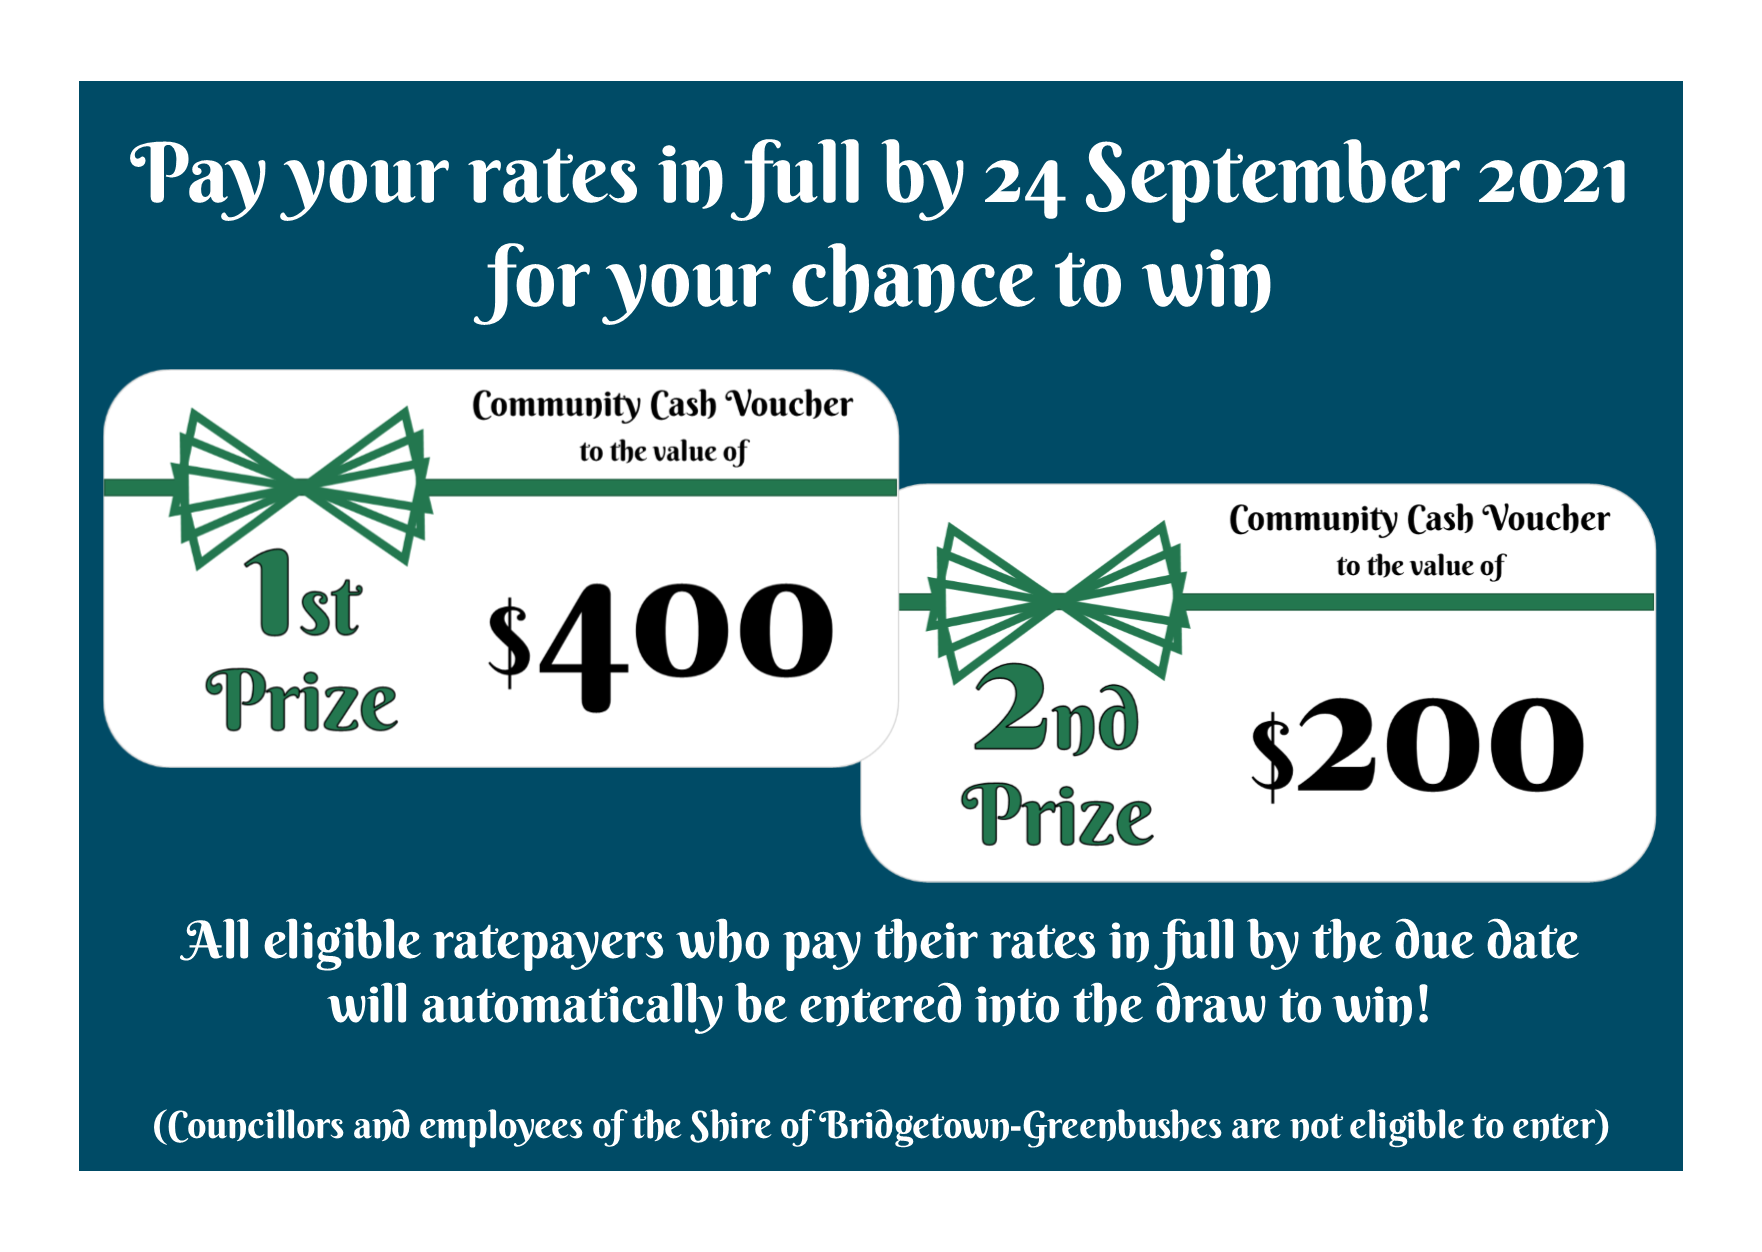 Pay your rates by 24 September for your chance to win!